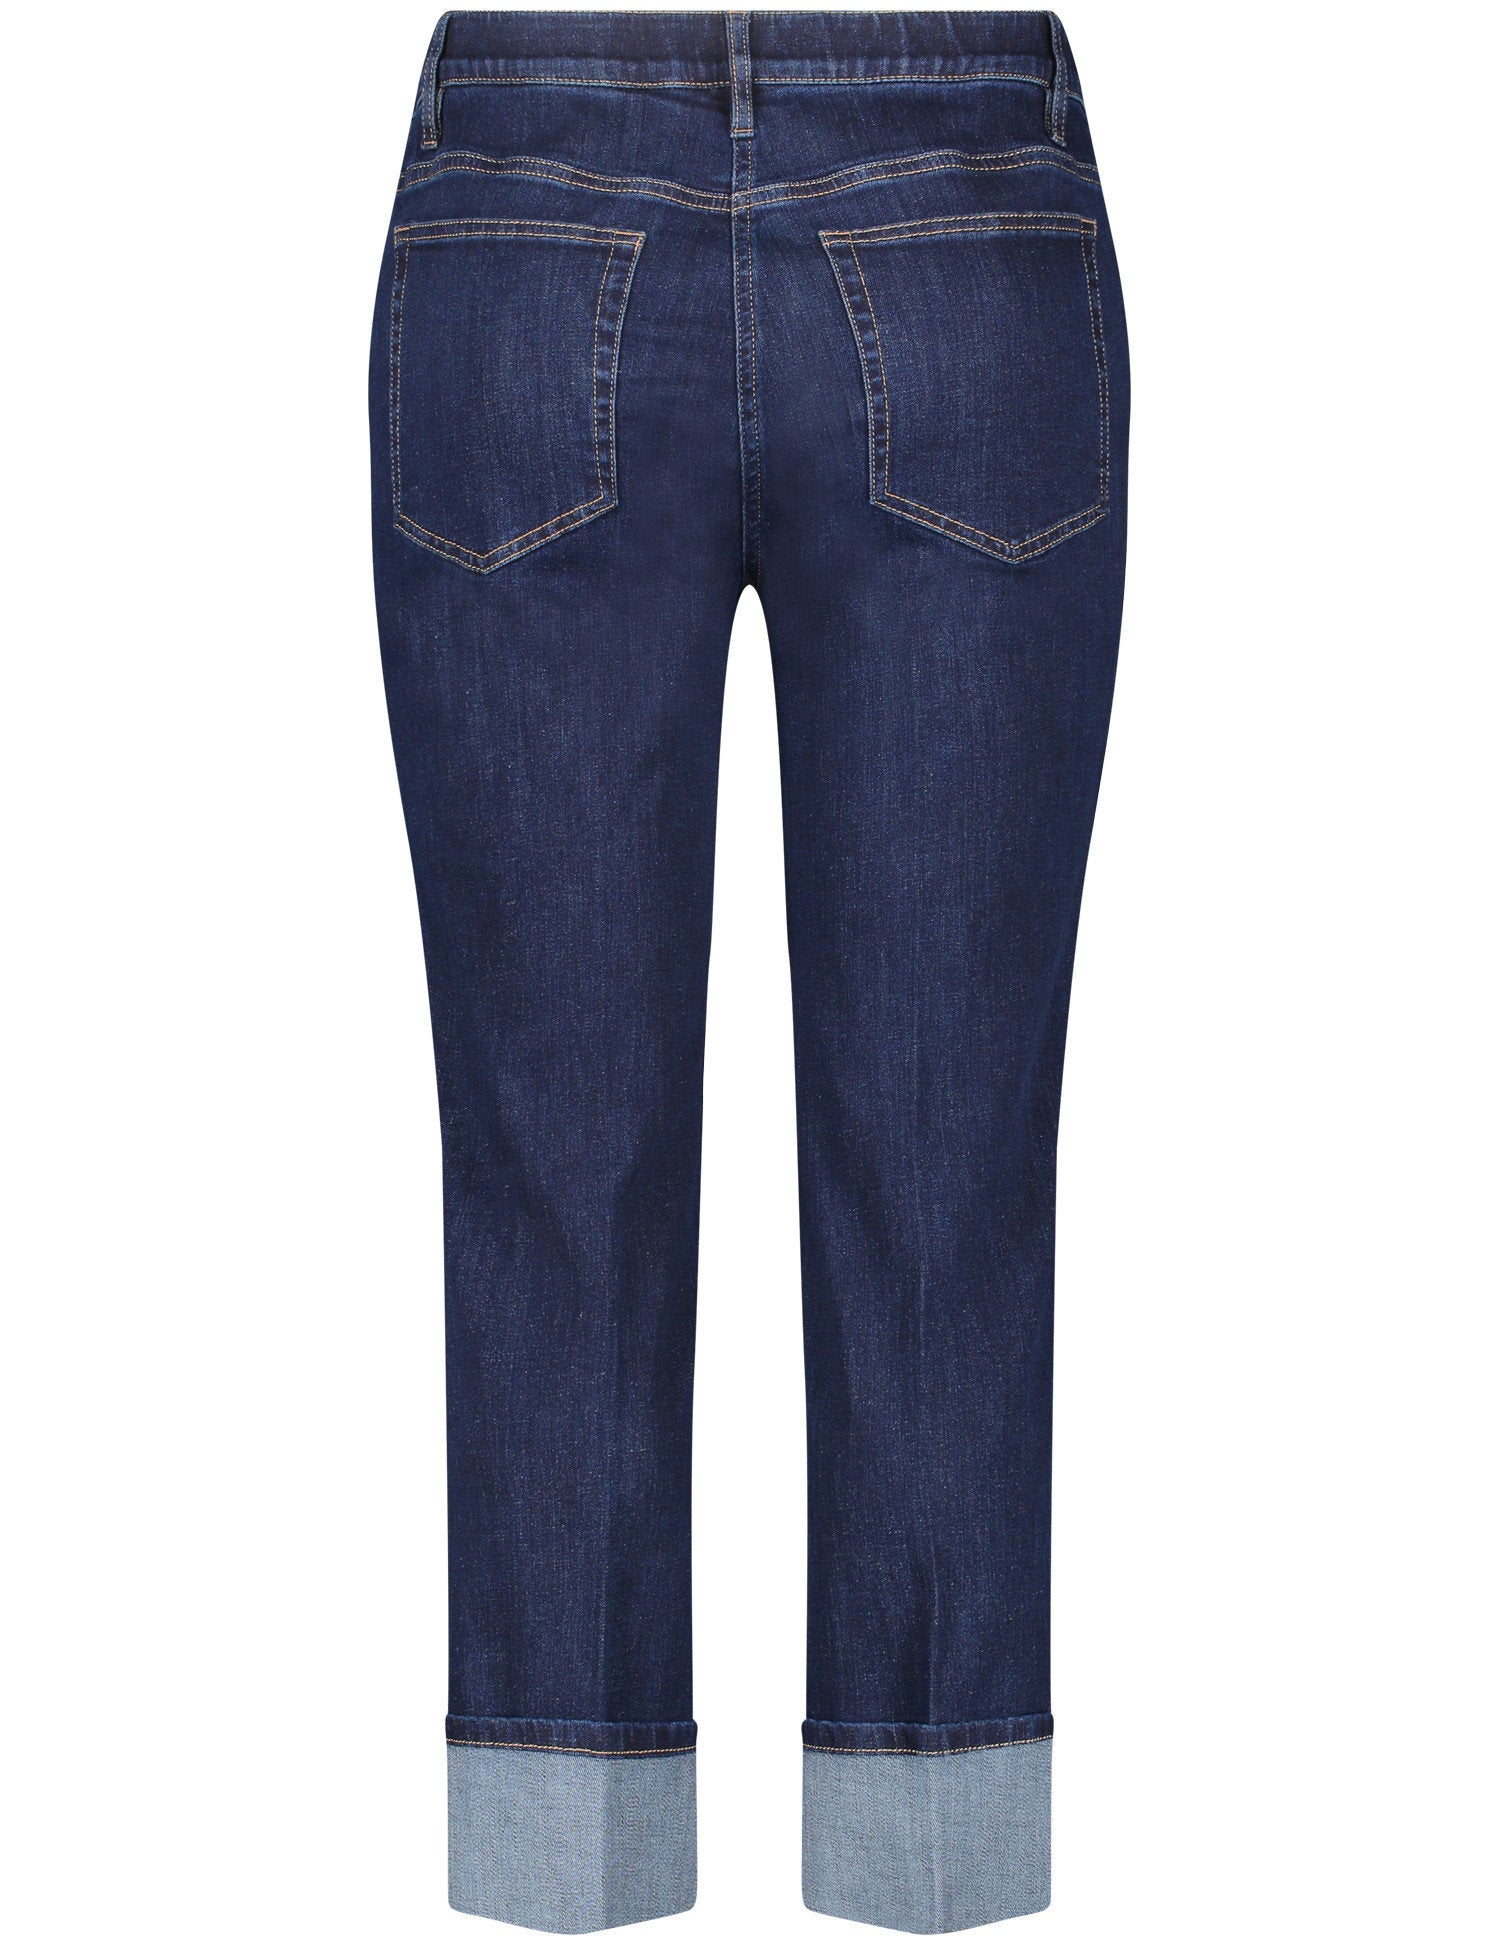 7-8-Length Jeans With Turn-Ups_320228-21431_8999_03